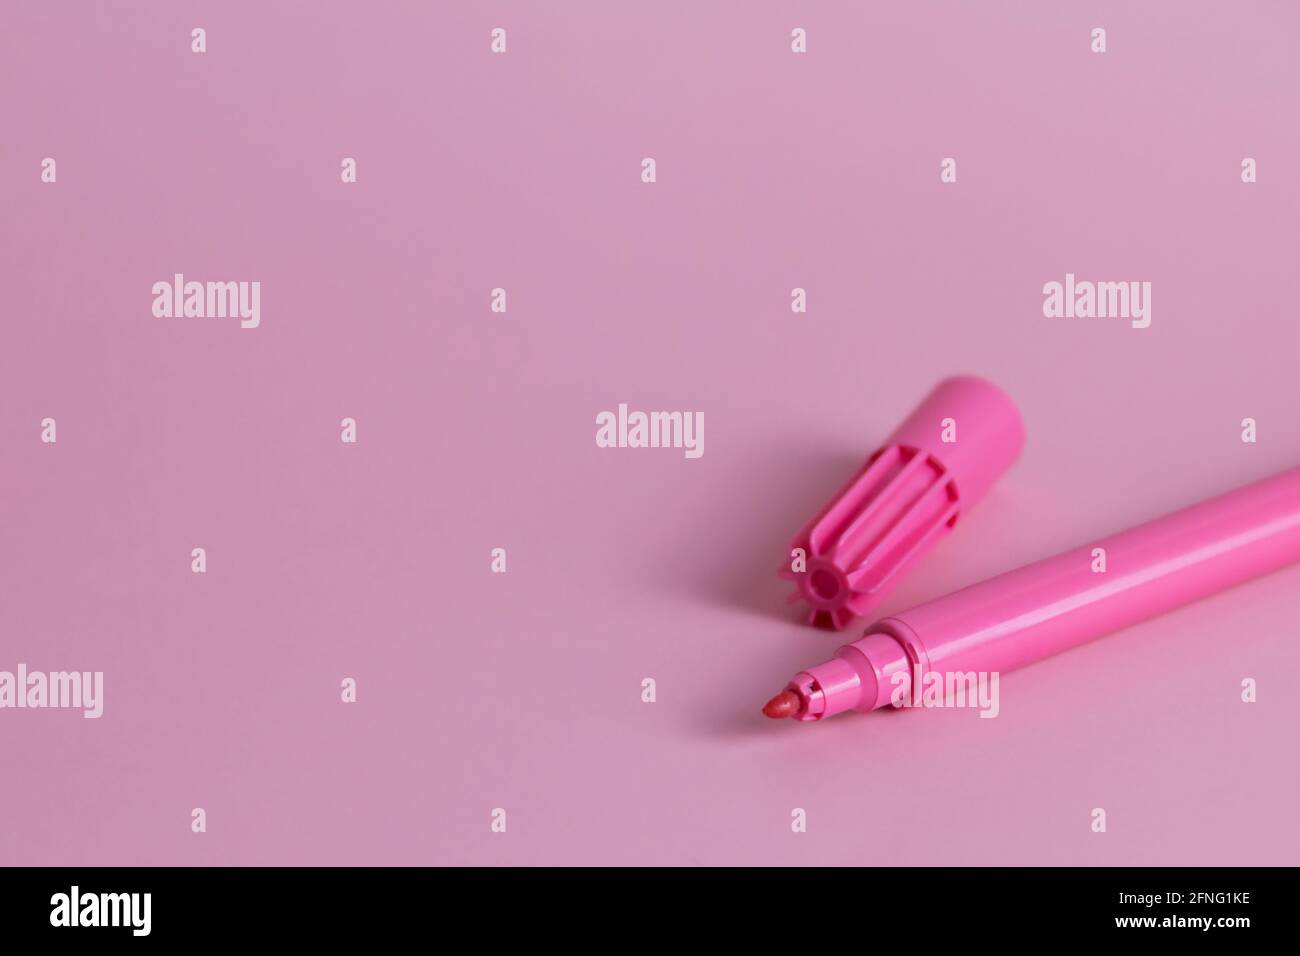 Colorful pink marker pen isolated on pink background Stock Photo